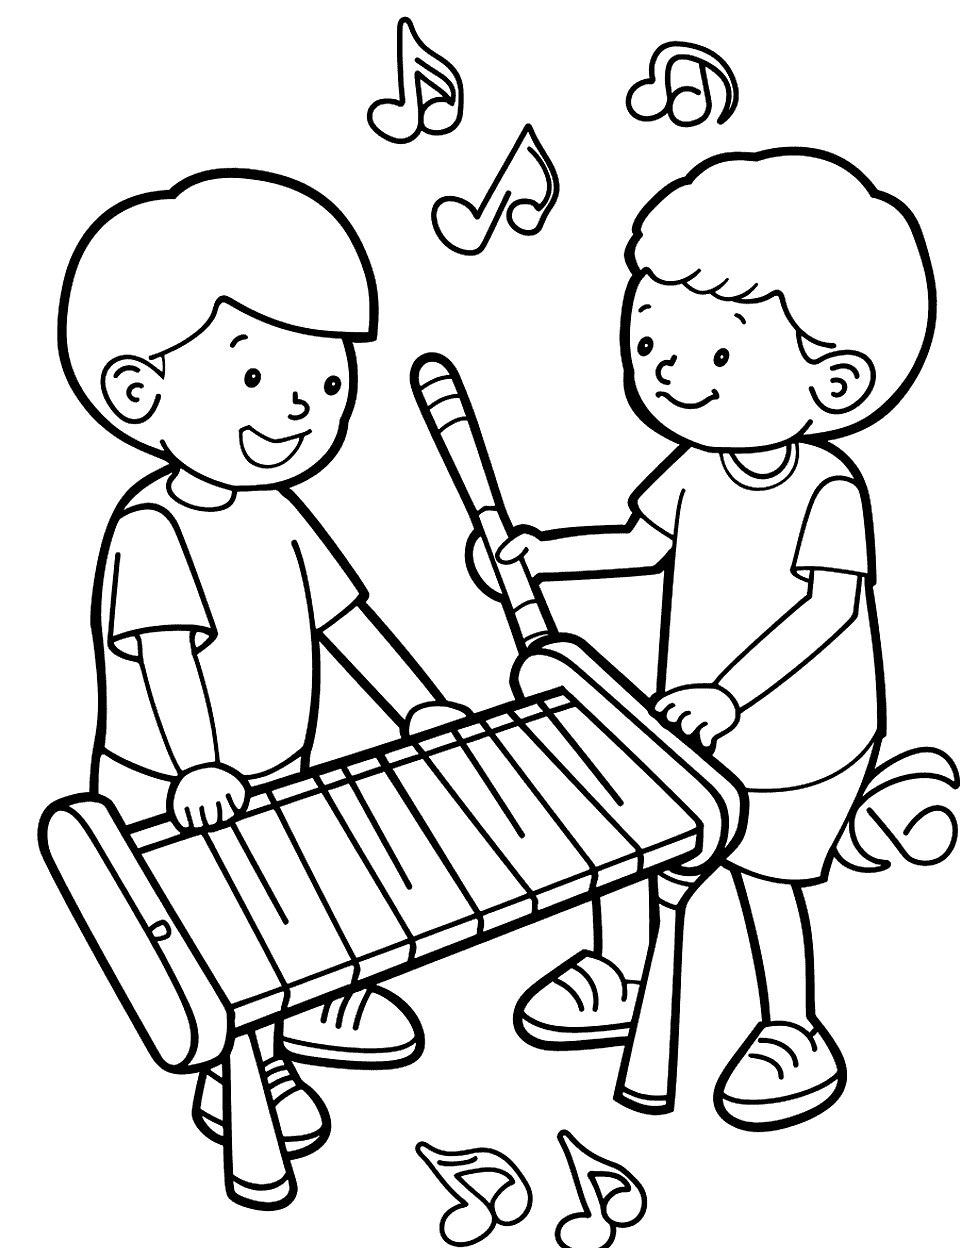 Xylophone Fun in the Playground Music Coloring Page - Kids playing a xylophone in a playground.